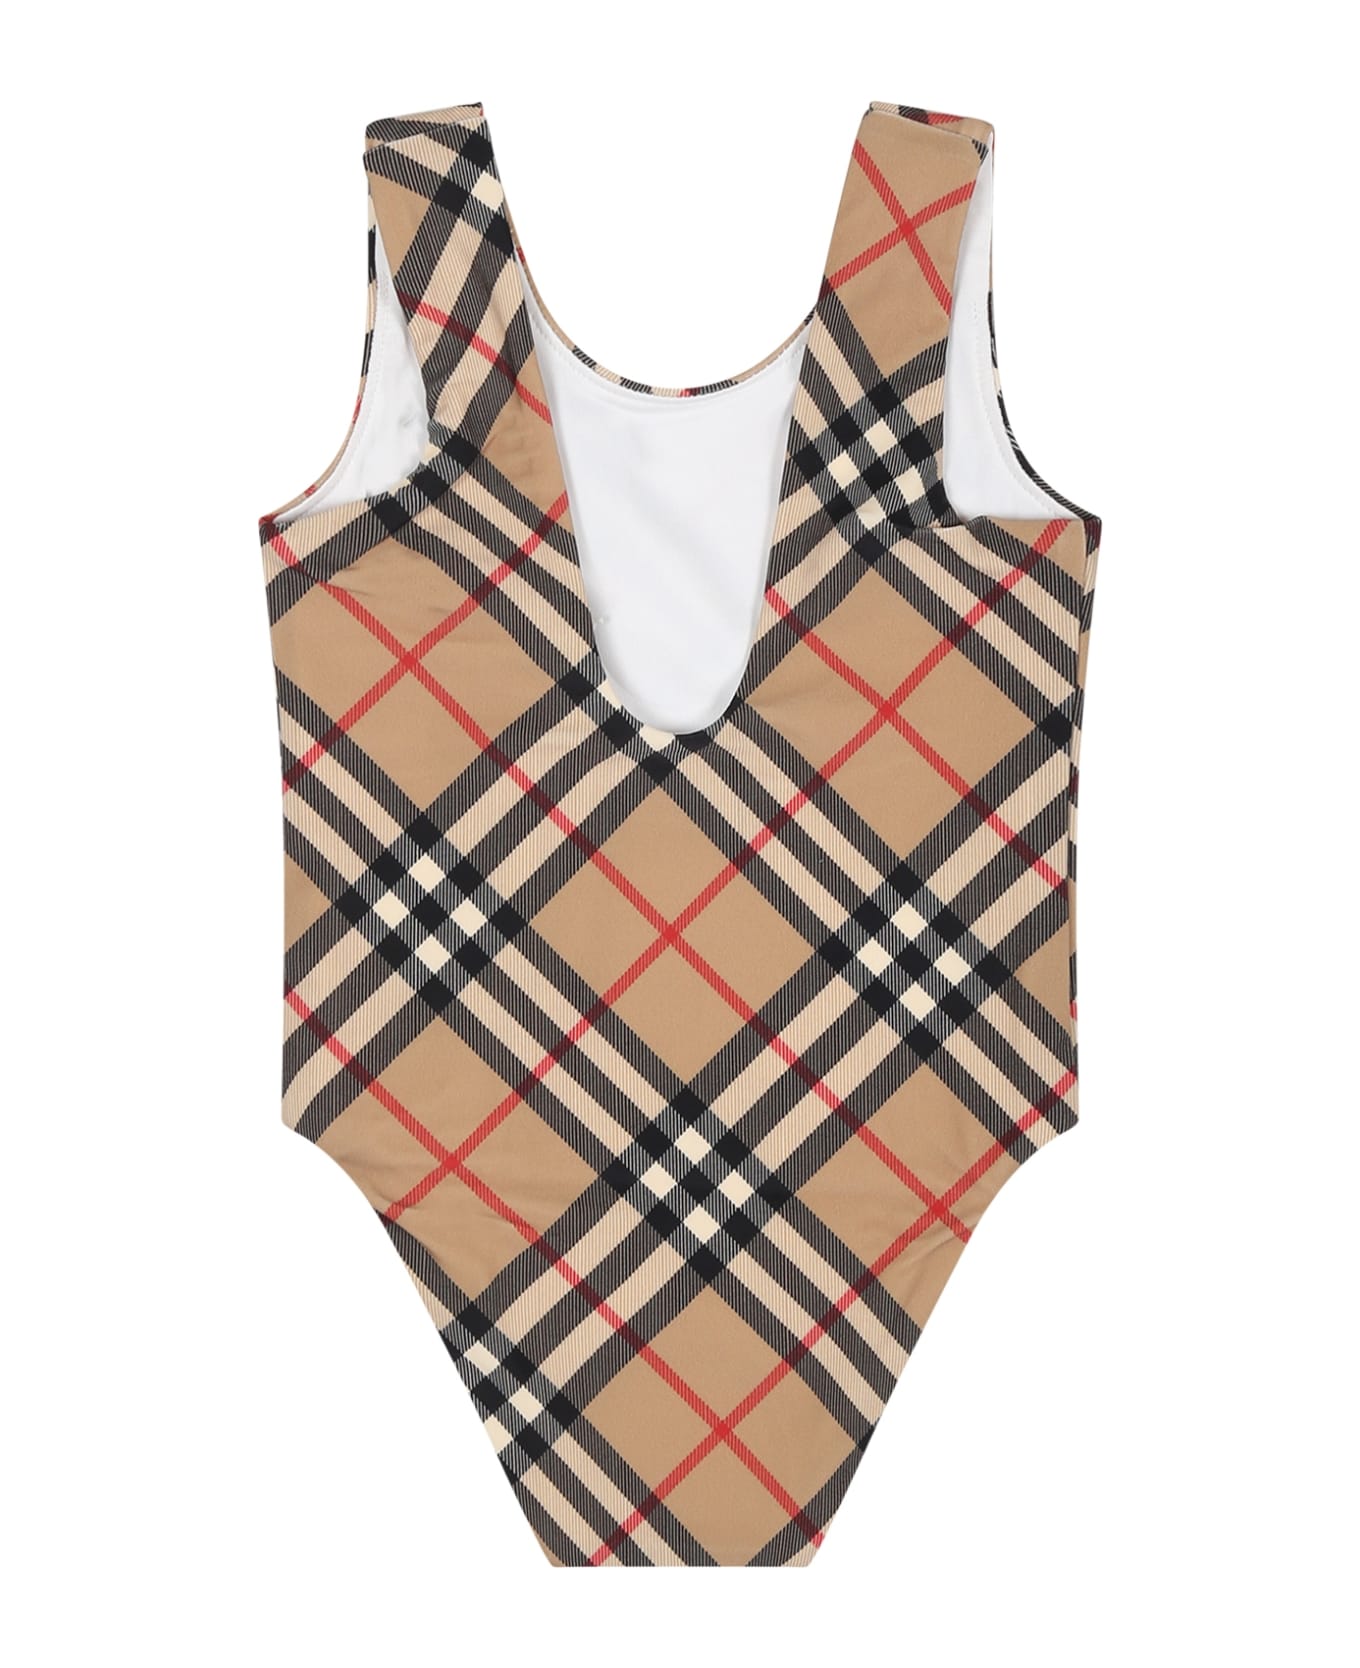 Burberry Beige Swimsuit For Baby Girl With Iconic Check - Beige 水着